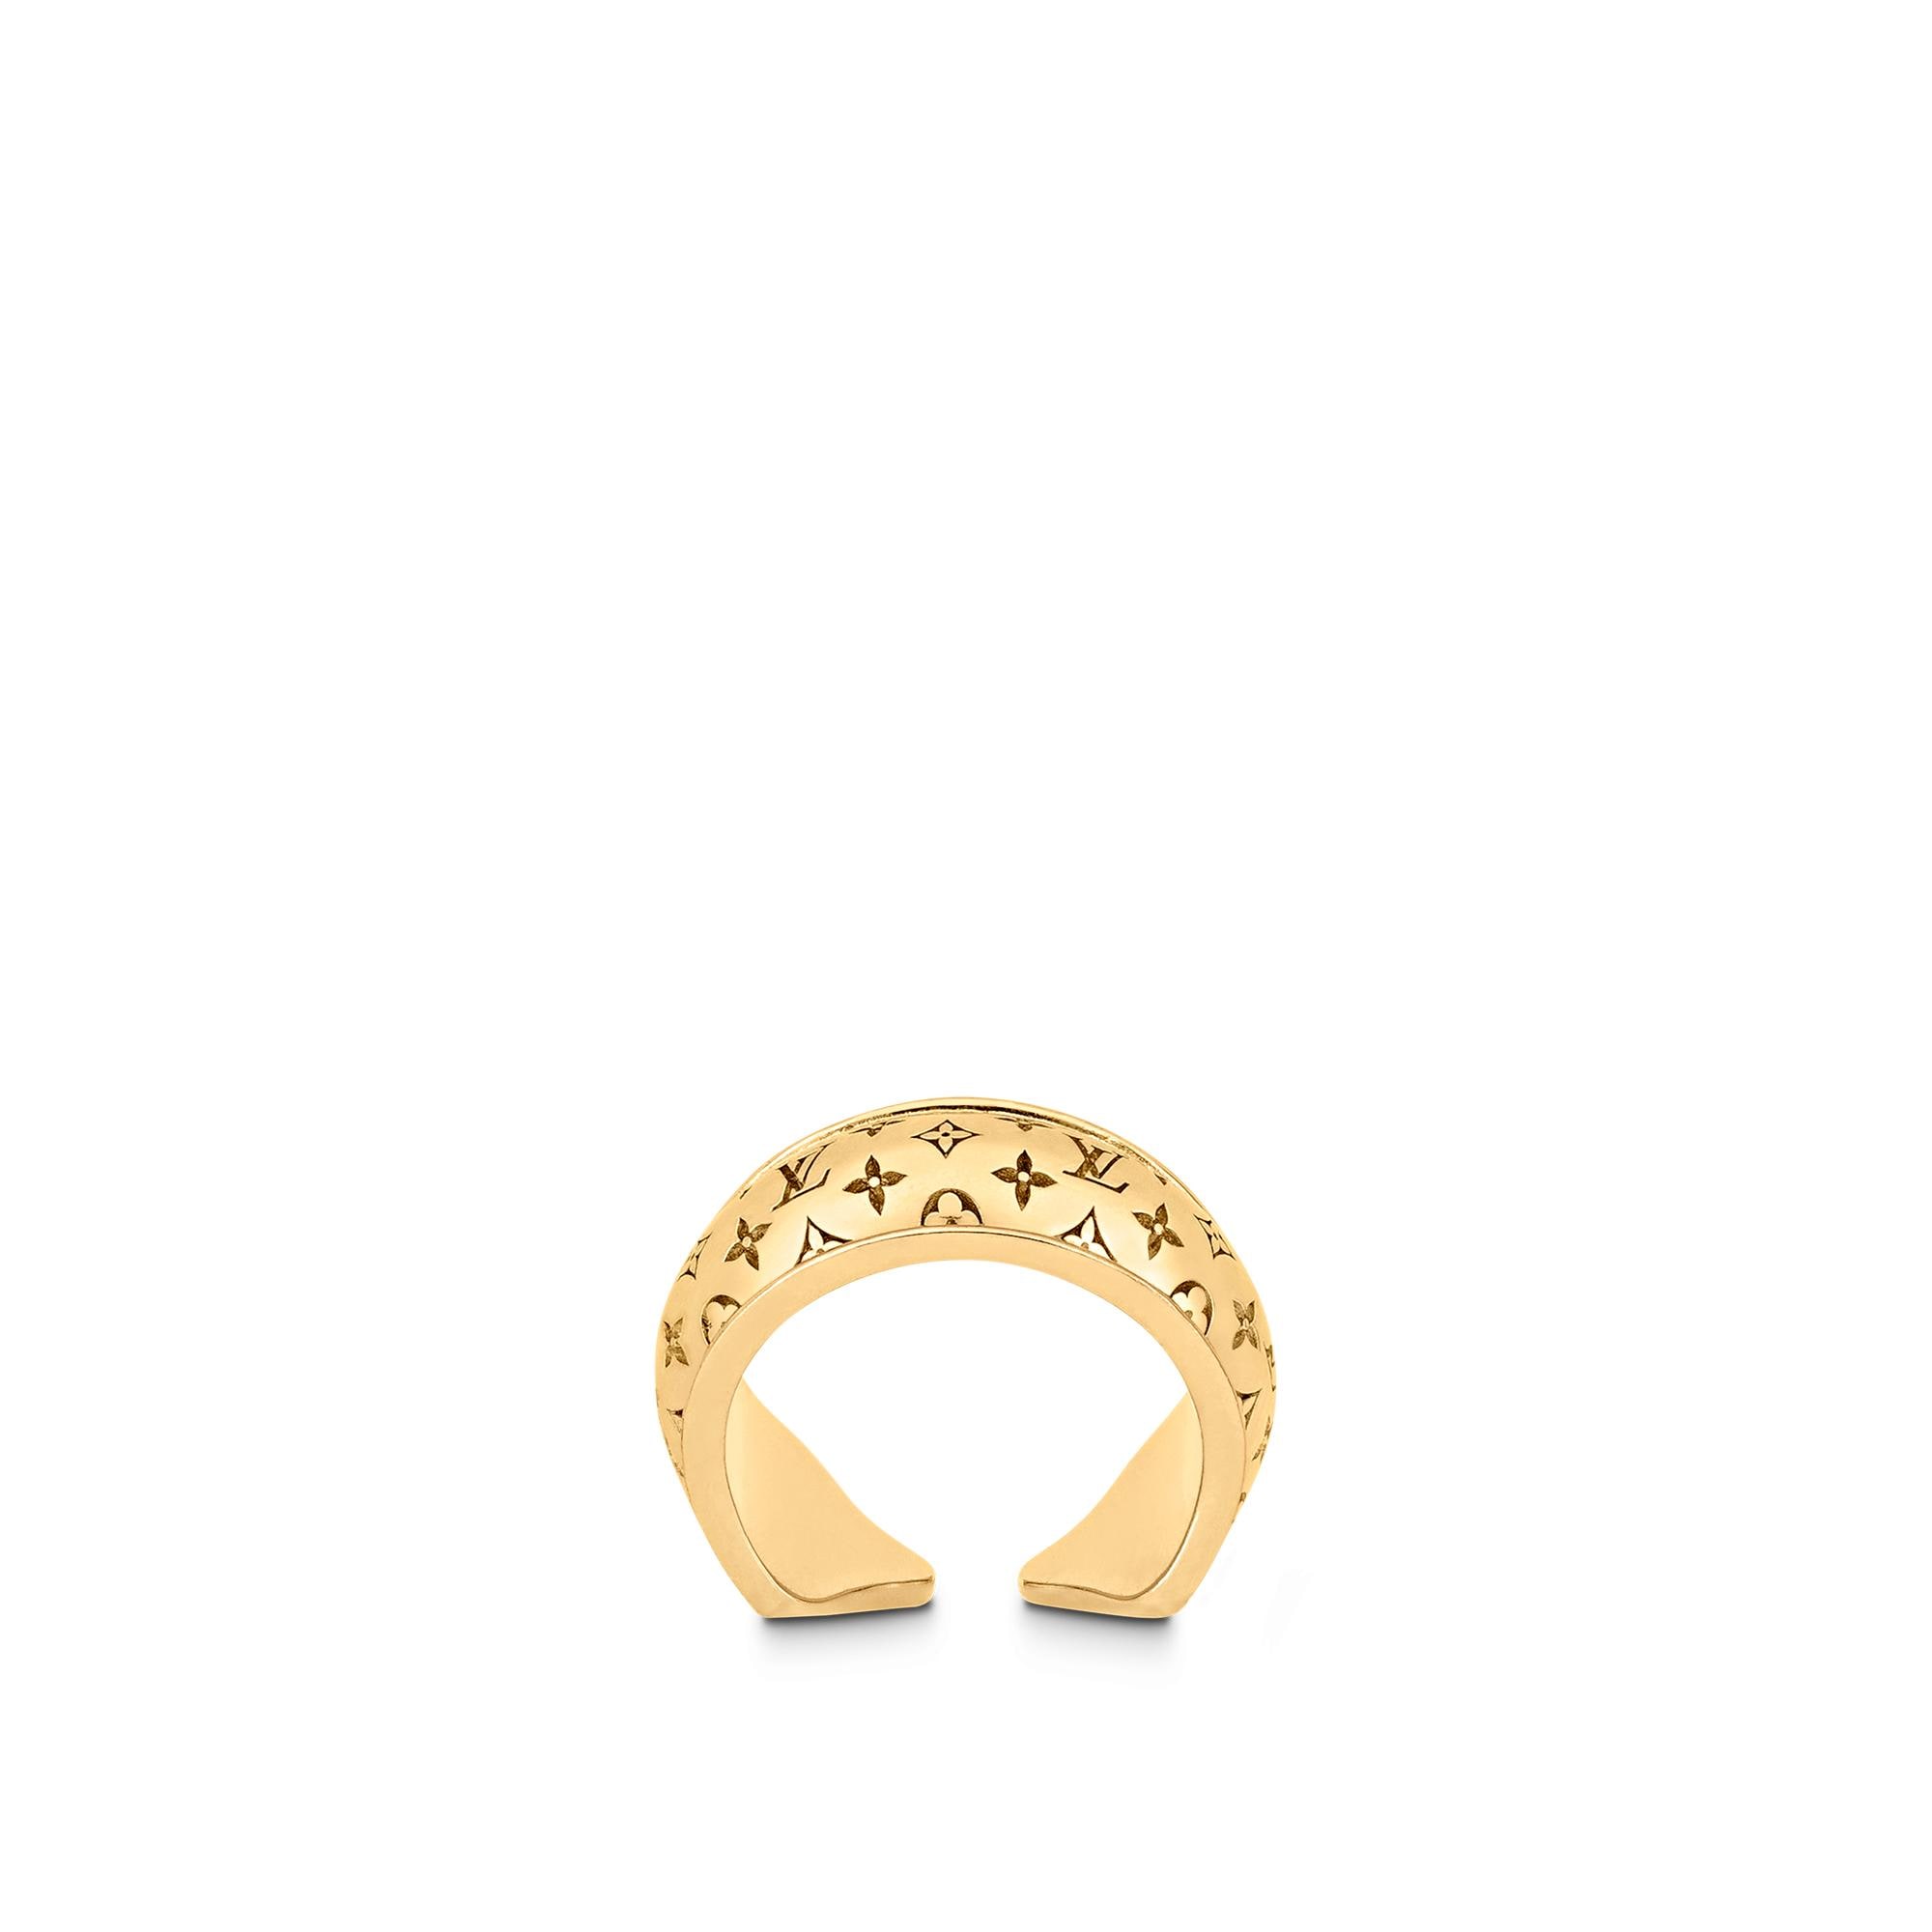 Sold at Auction: Louis Vuitton Nanogram Sweet Dreams Ring (Sold Out)